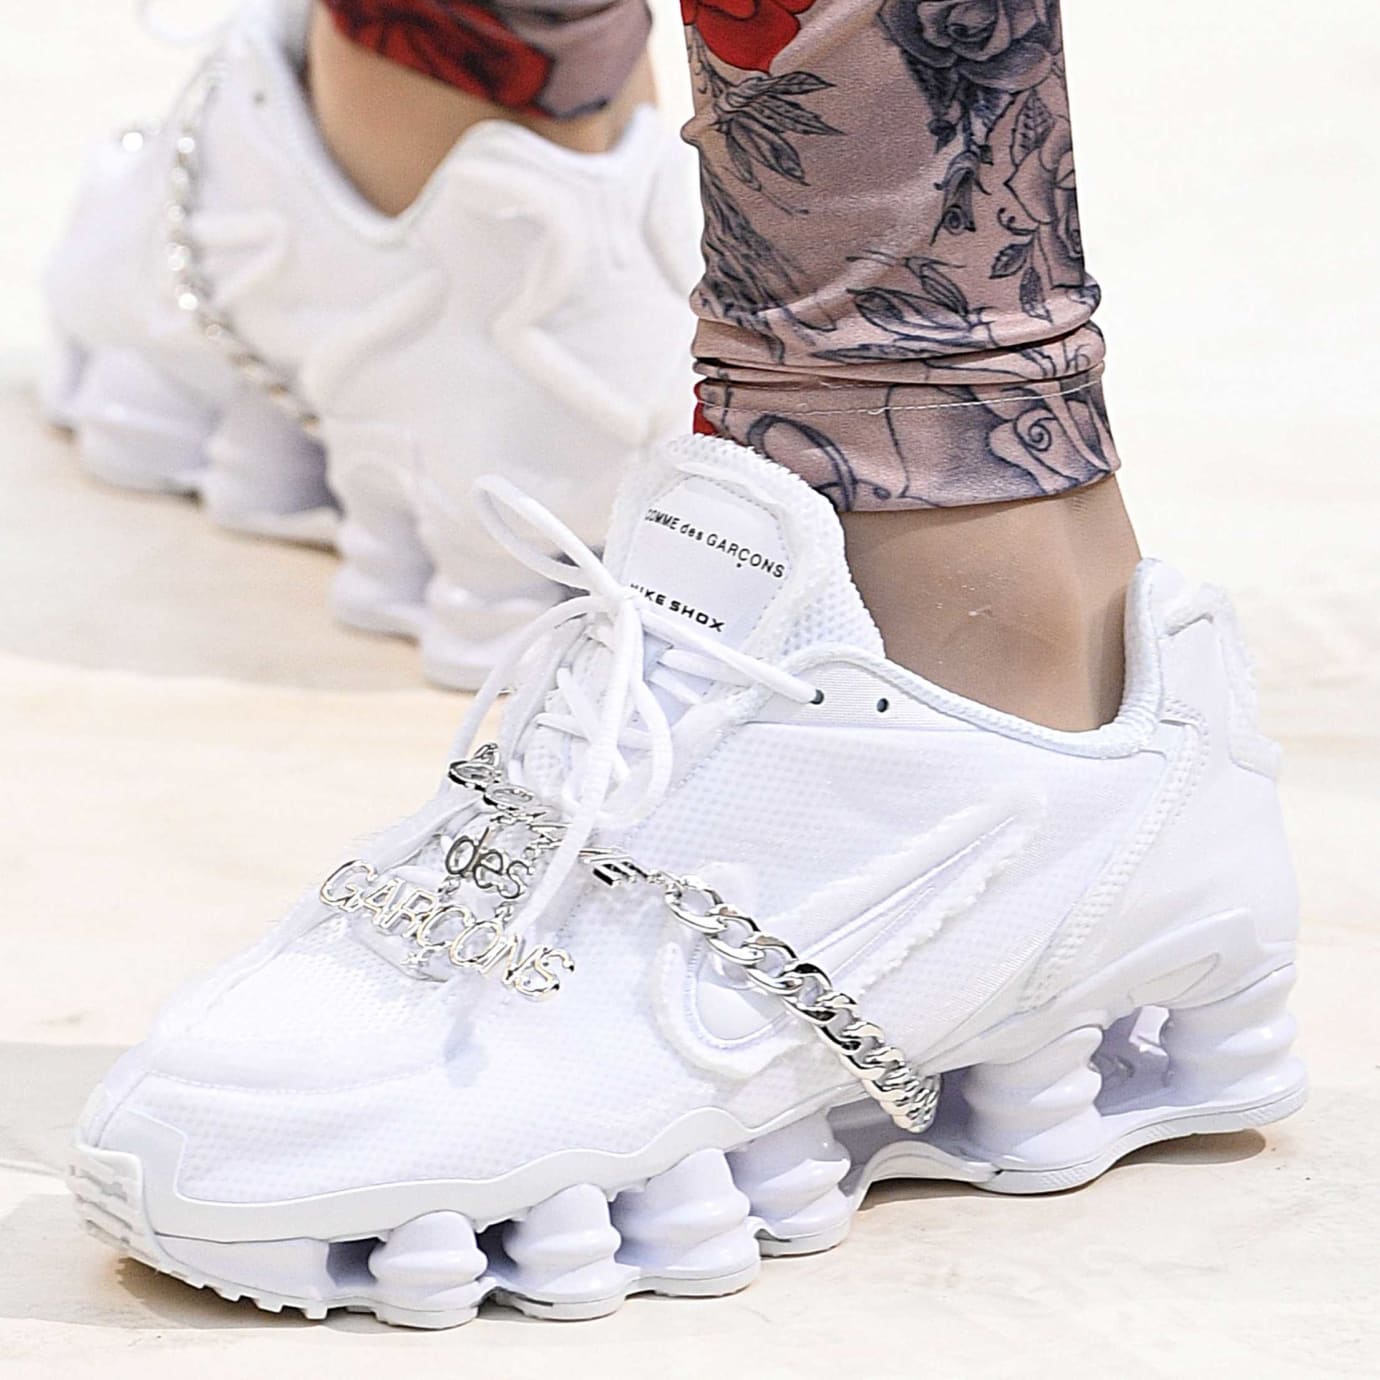 comme des garcons debuted which nike shoe